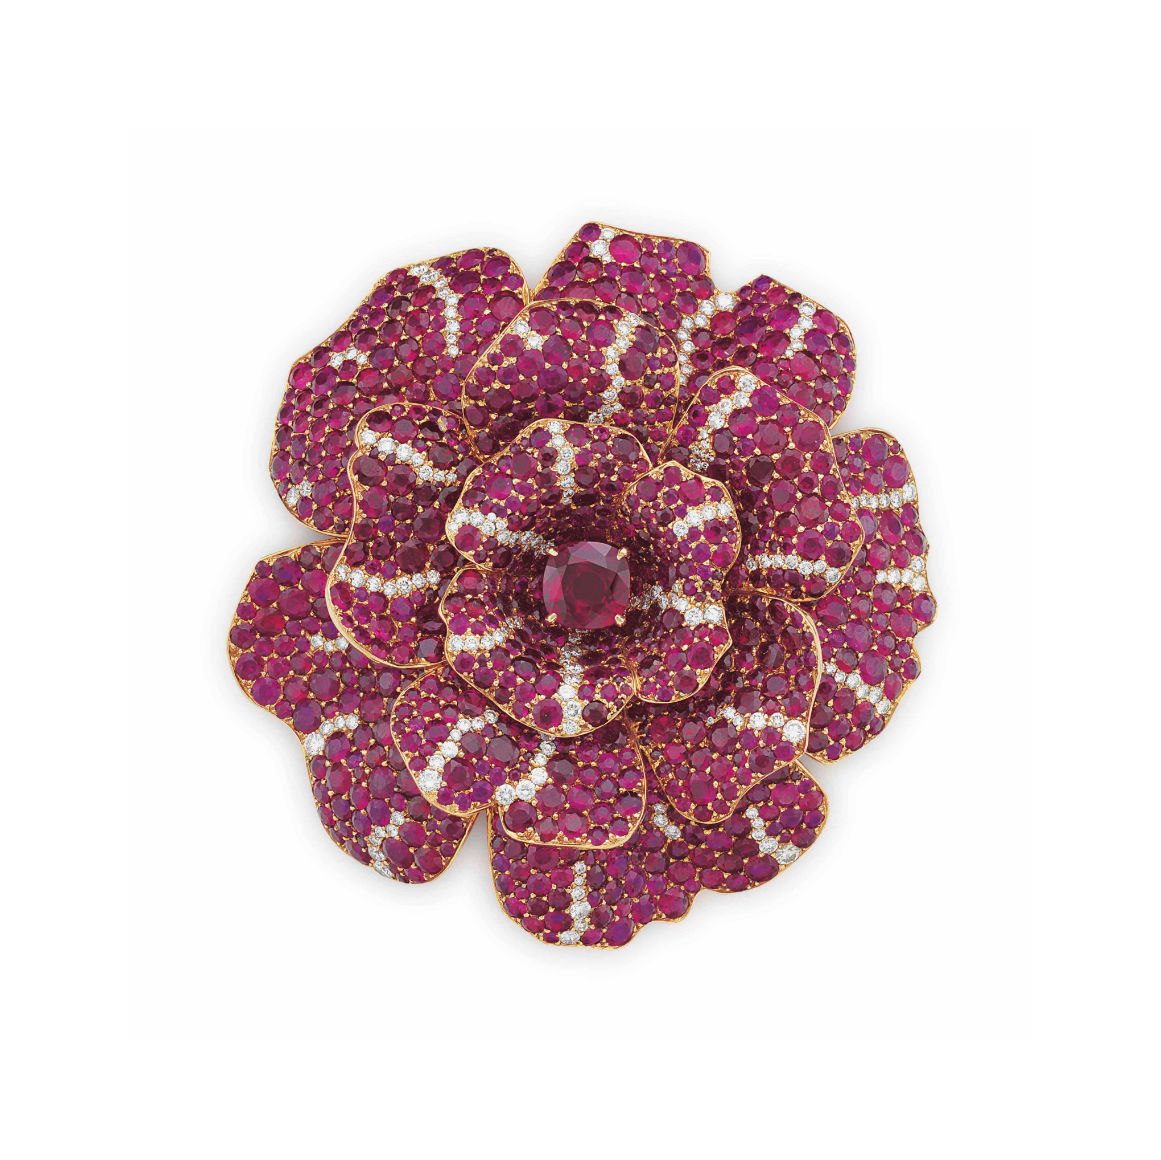 Chanel White Camellia Flower Brooches, 2 Pcs sold at auction on